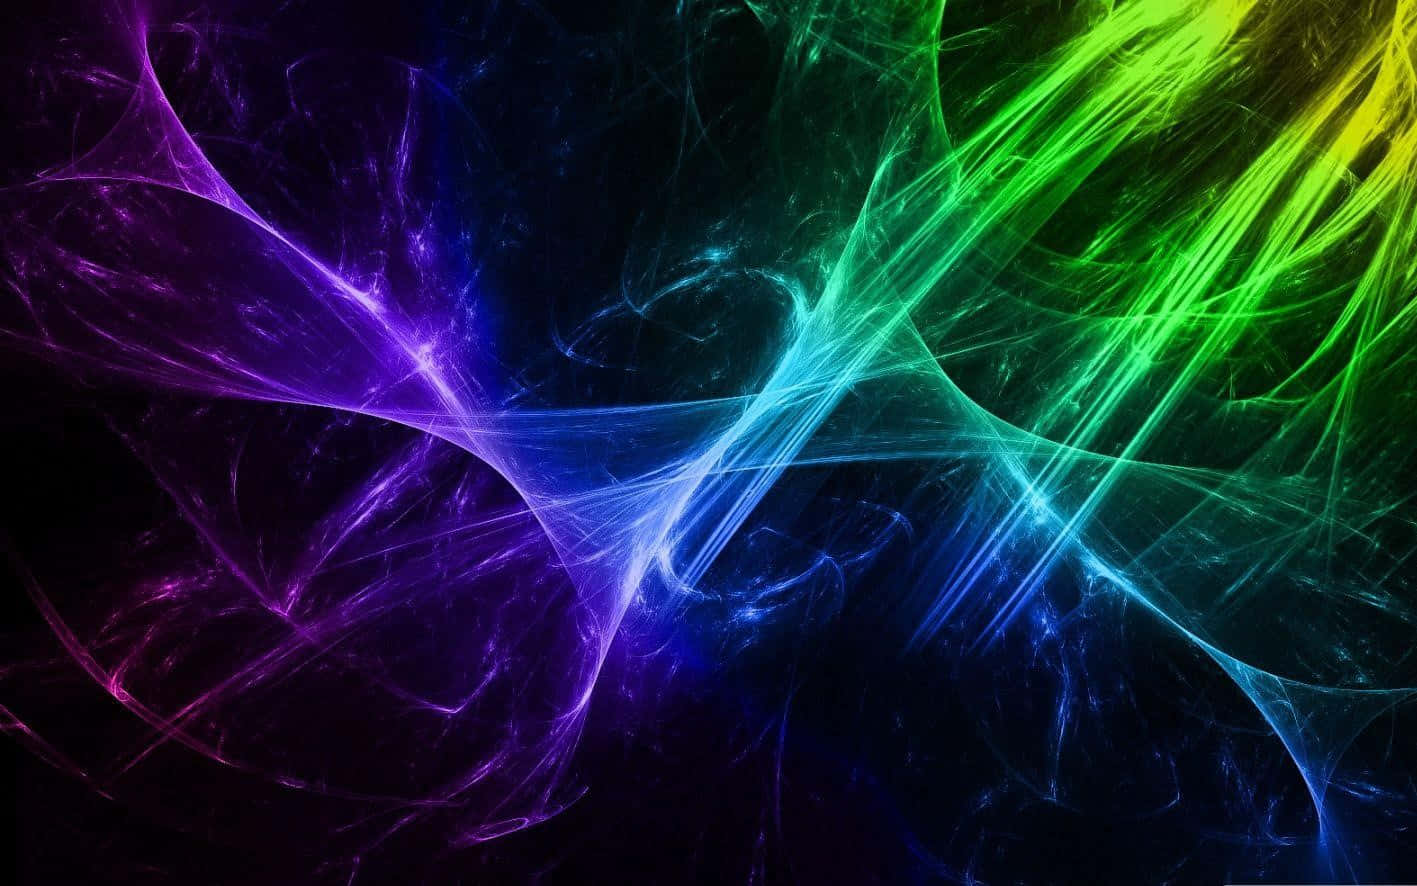 A Colorful Abstract Background With Colorful Lights